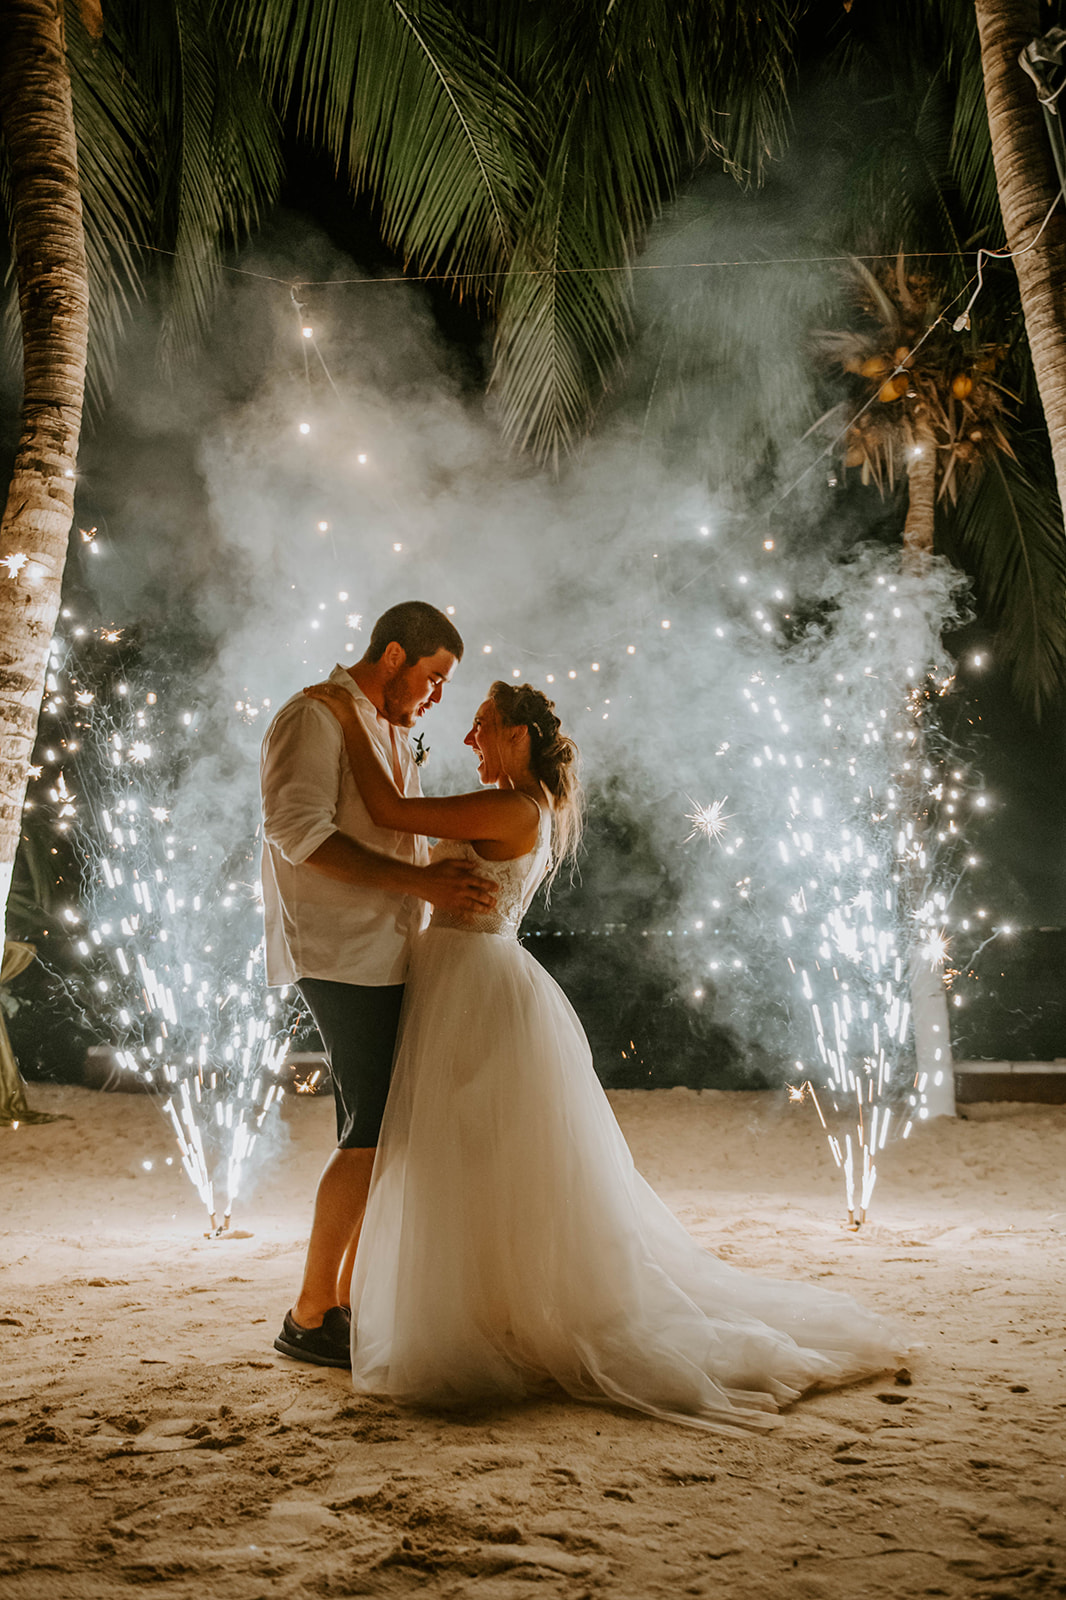 Bride and groom celebrating with fireworks at Zama wedding in Isla Mujeres